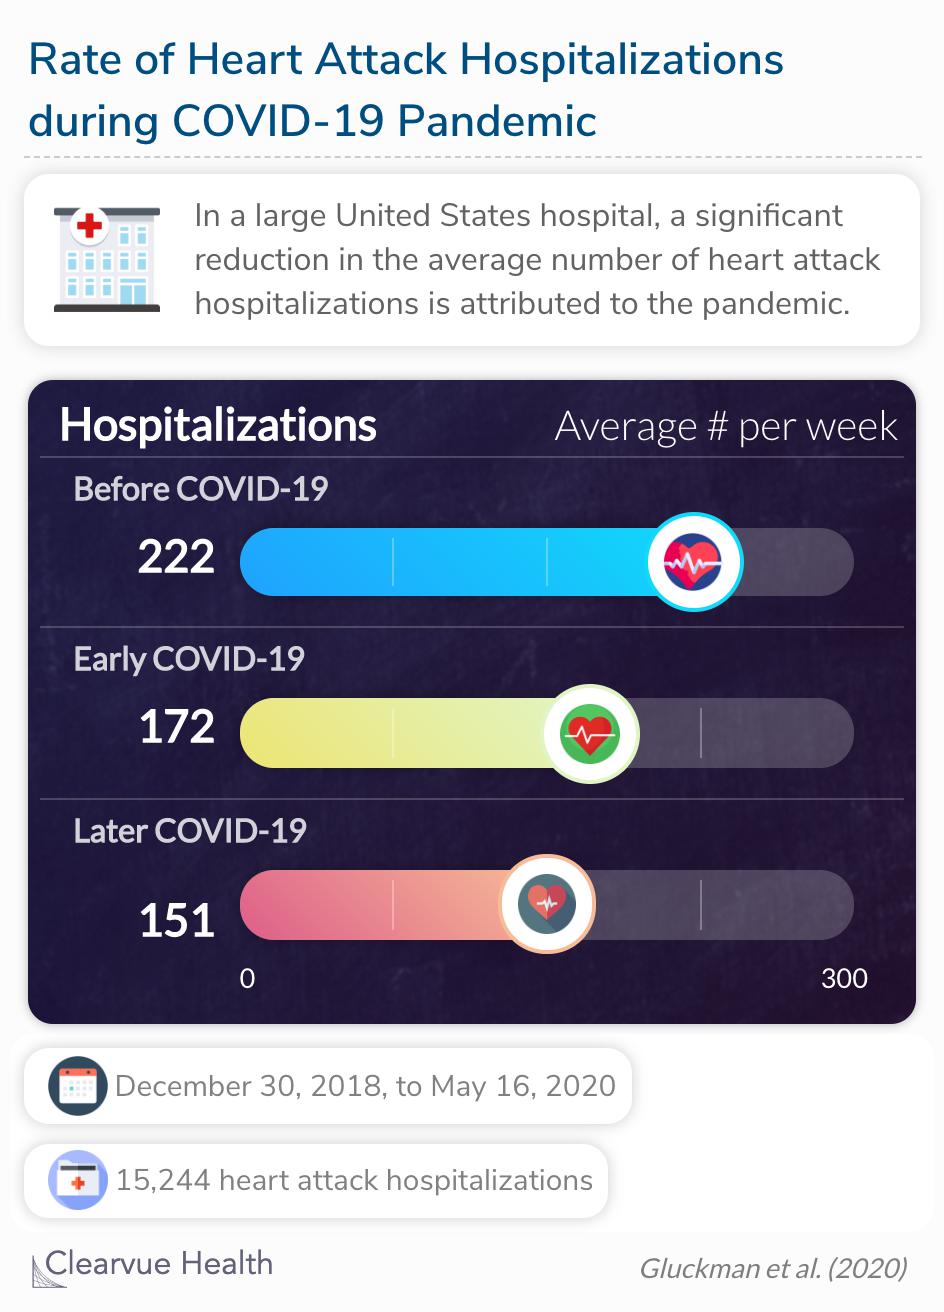 Hospitalizations for heart attack cases began to decrease on February 23, 2020, followed by a modest recovery after 5 weeks.